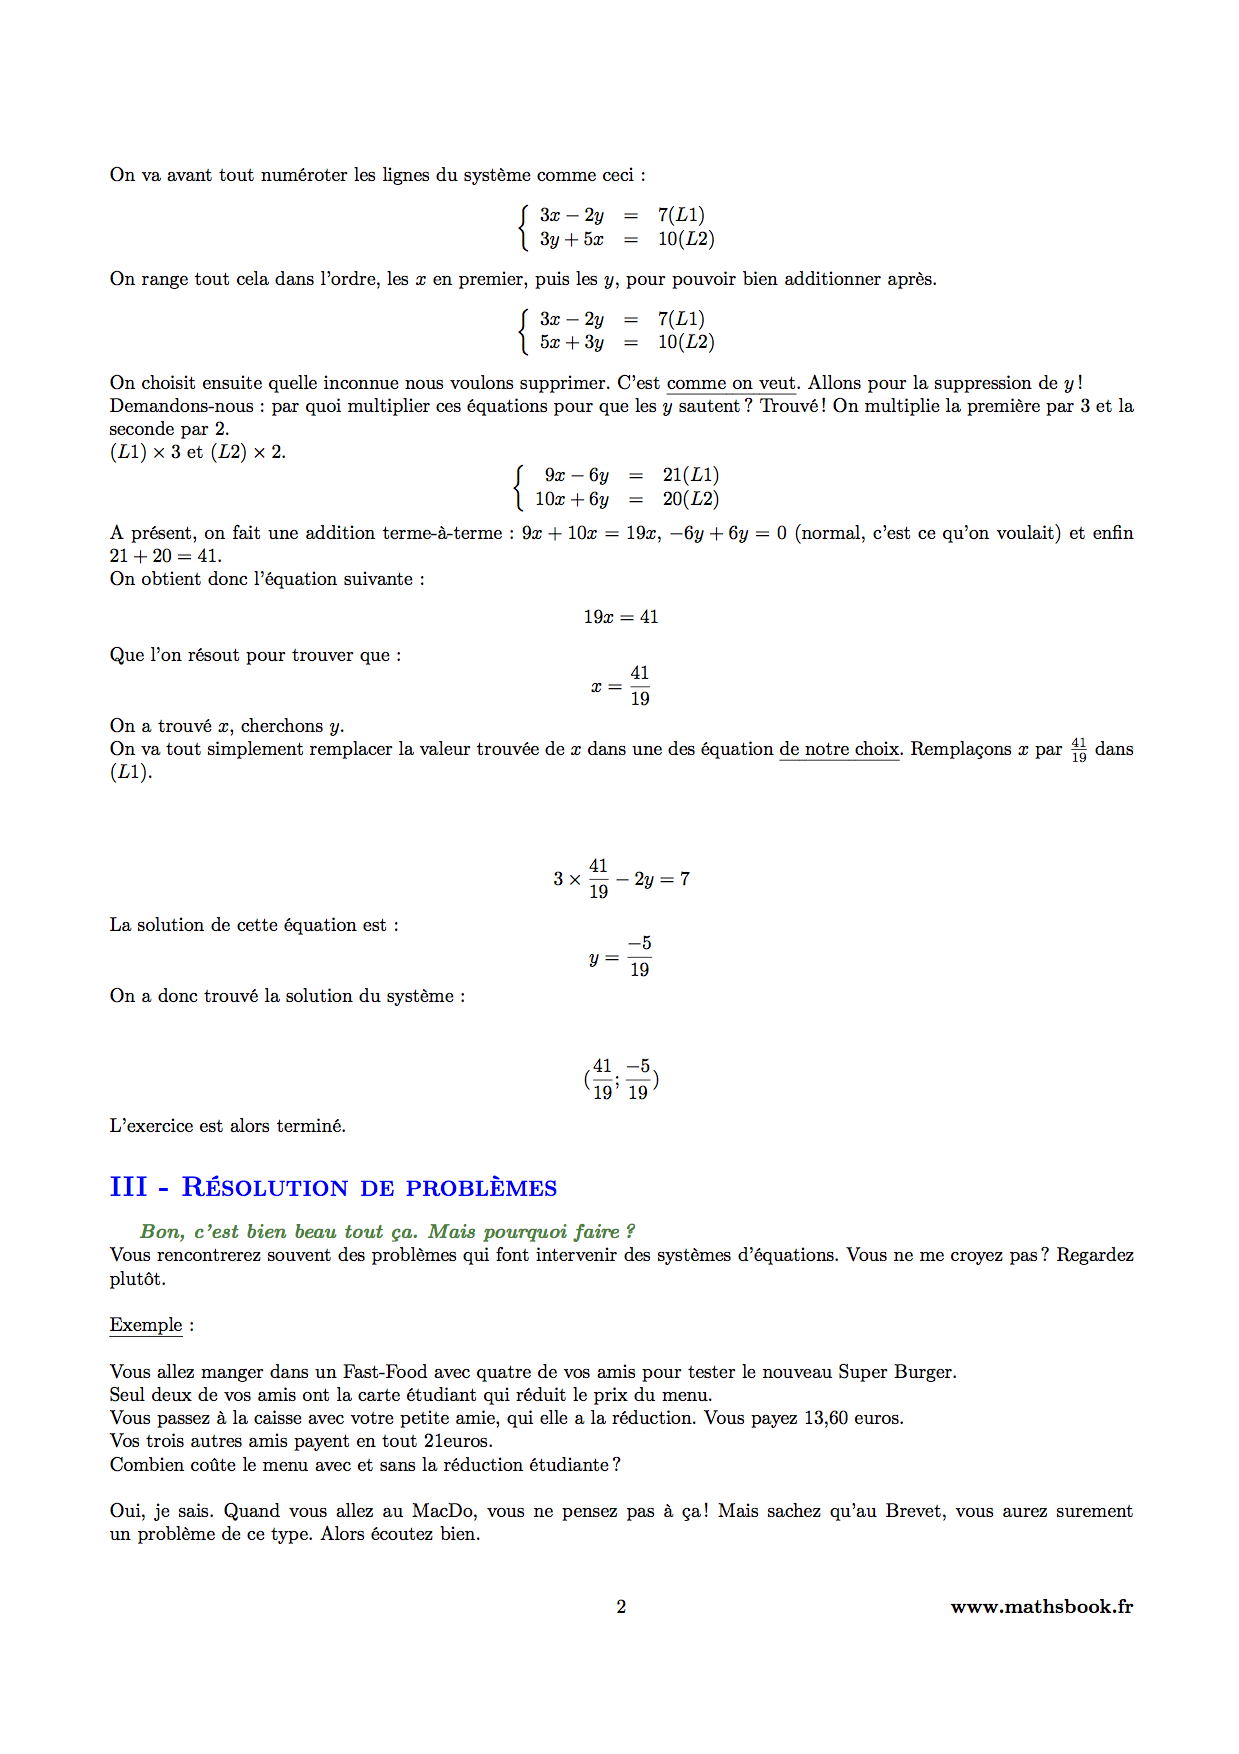 resolution systeme equations